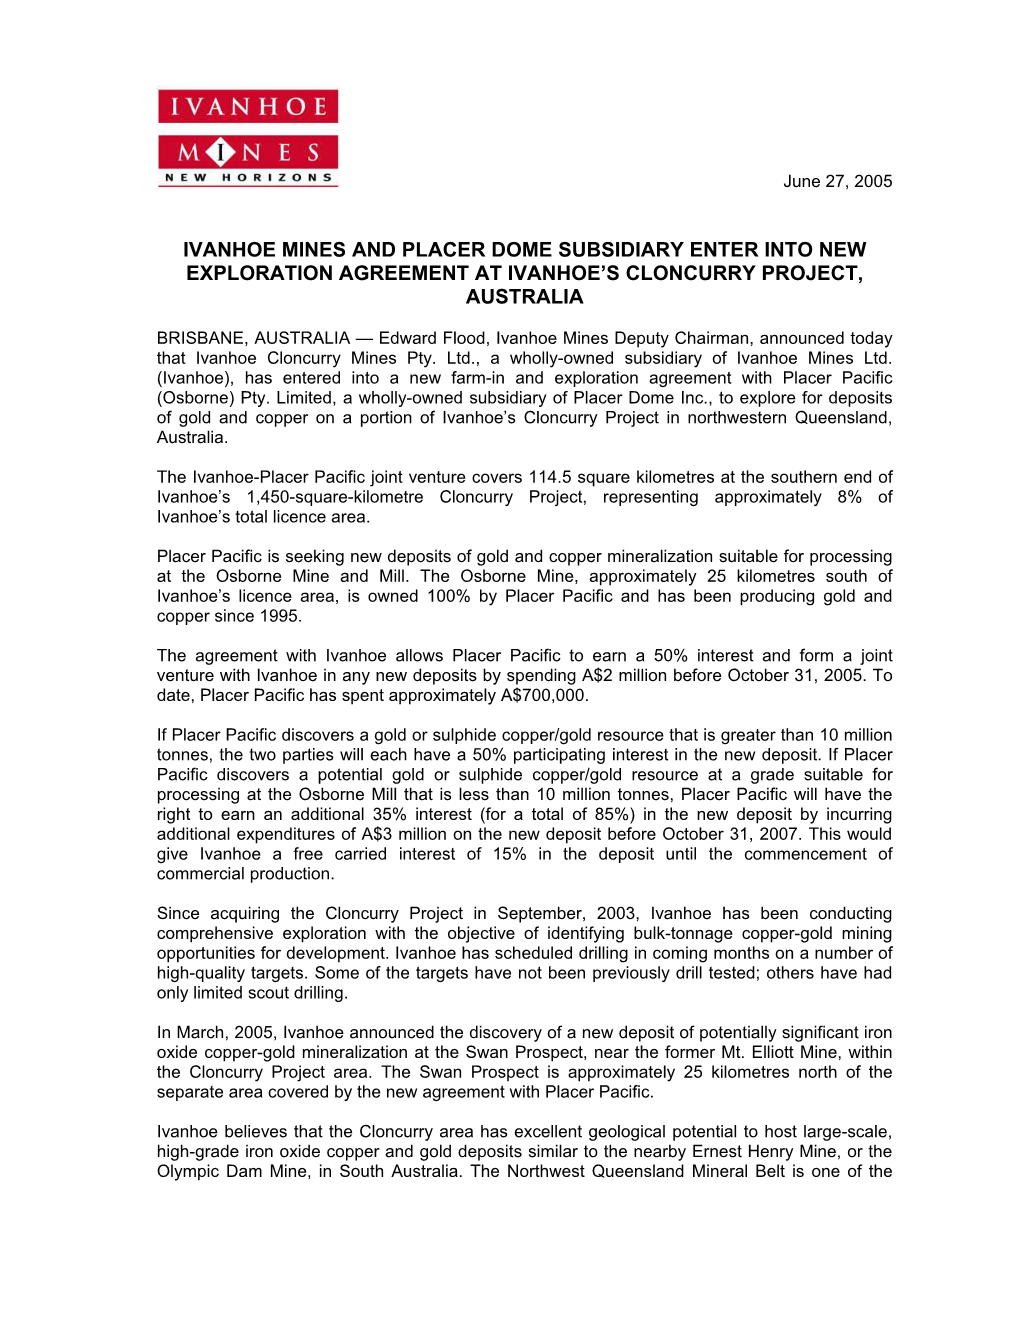 Ivanhoe Mines and Placer Dome Subsidiary Enter Into New Exploration Agreement at Ivanhoe’S Cloncurry Project, Australia